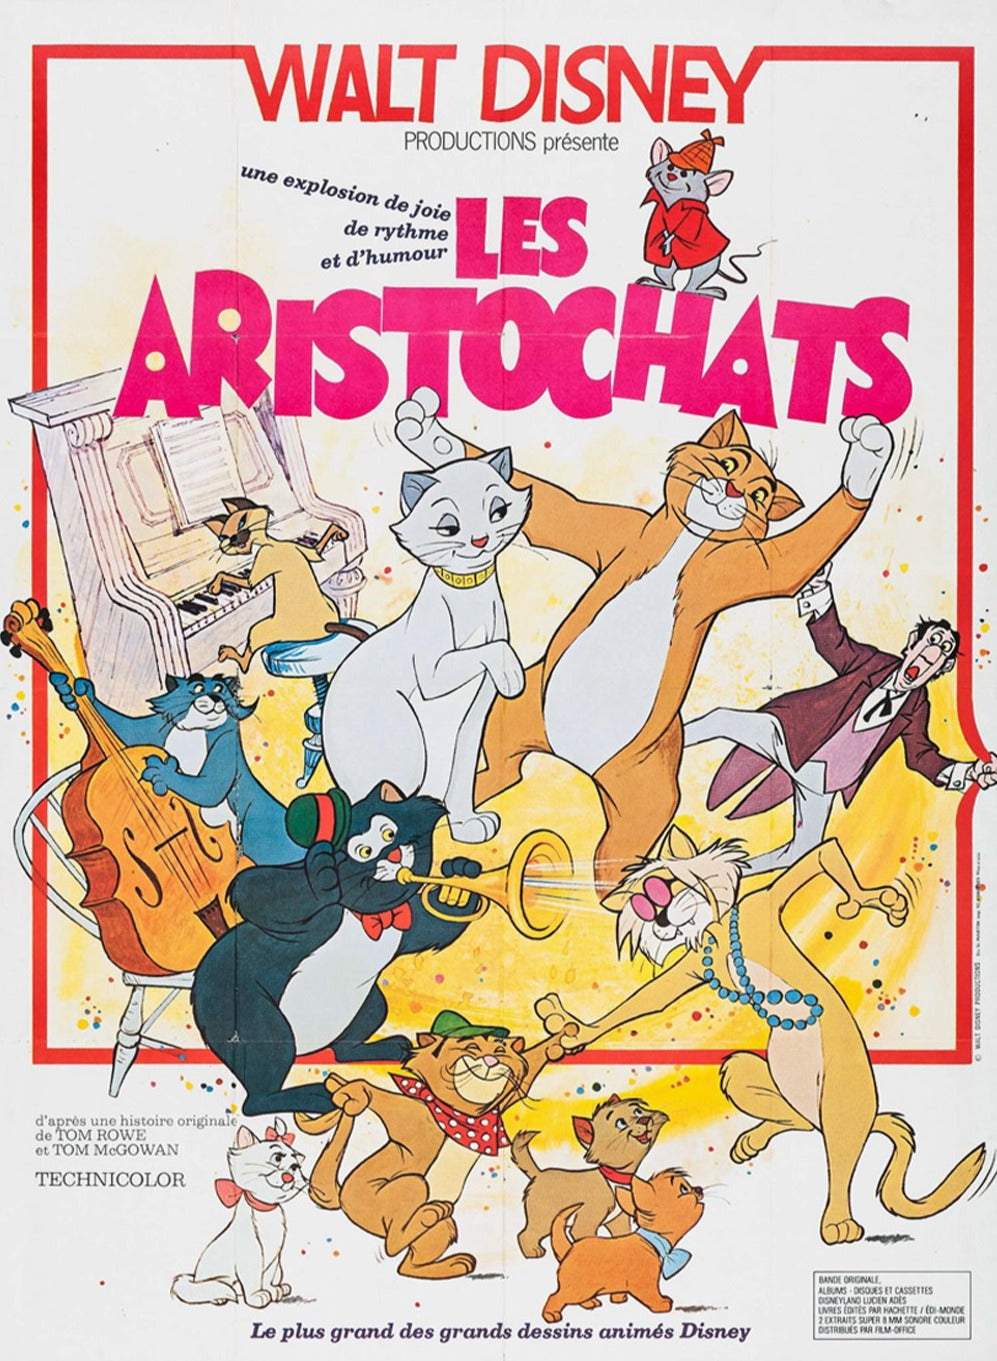 Aristocats (French)